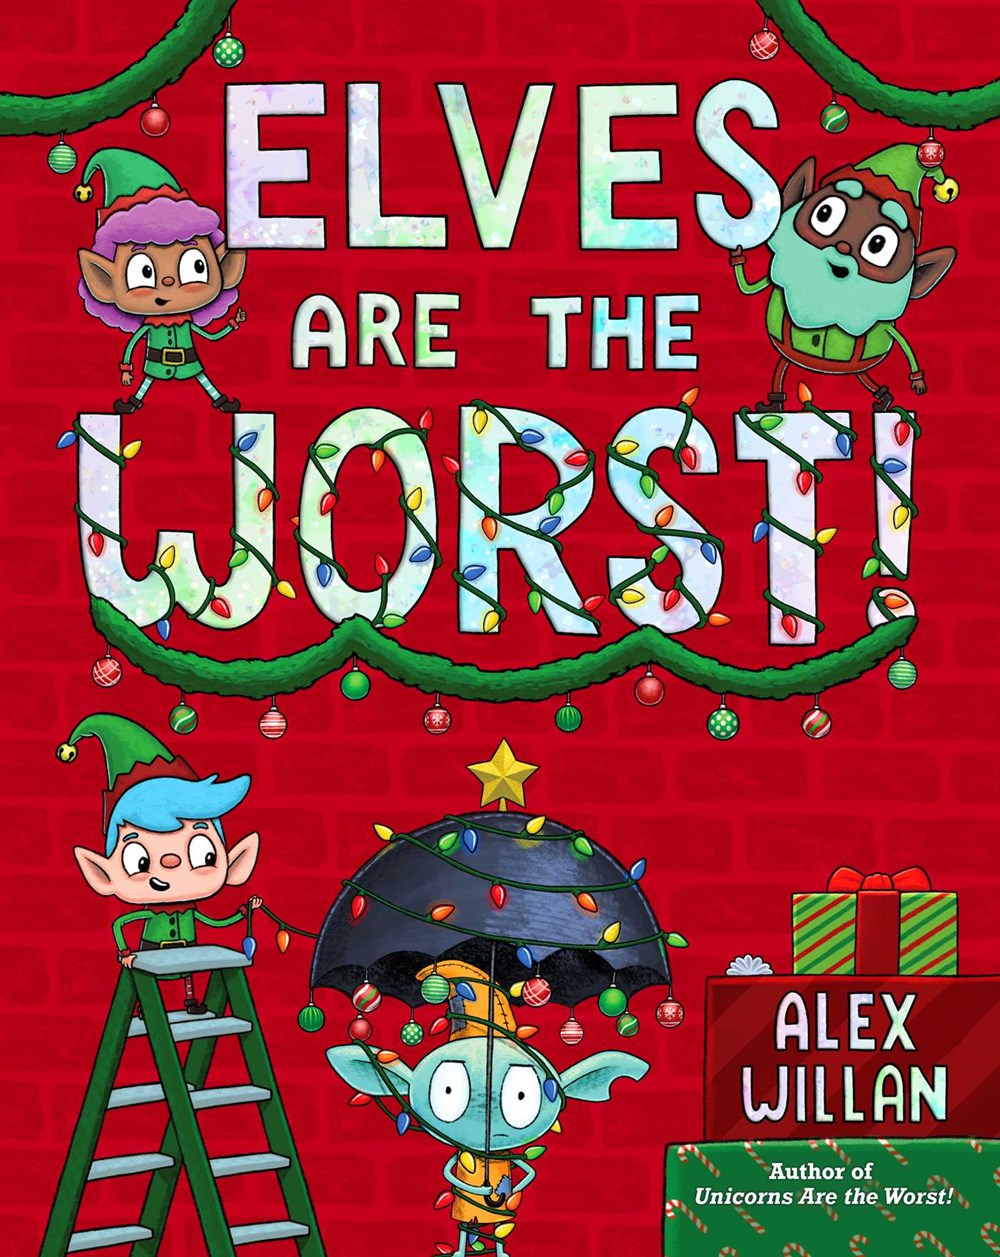 Elves Are the Worst! by Alex Willan